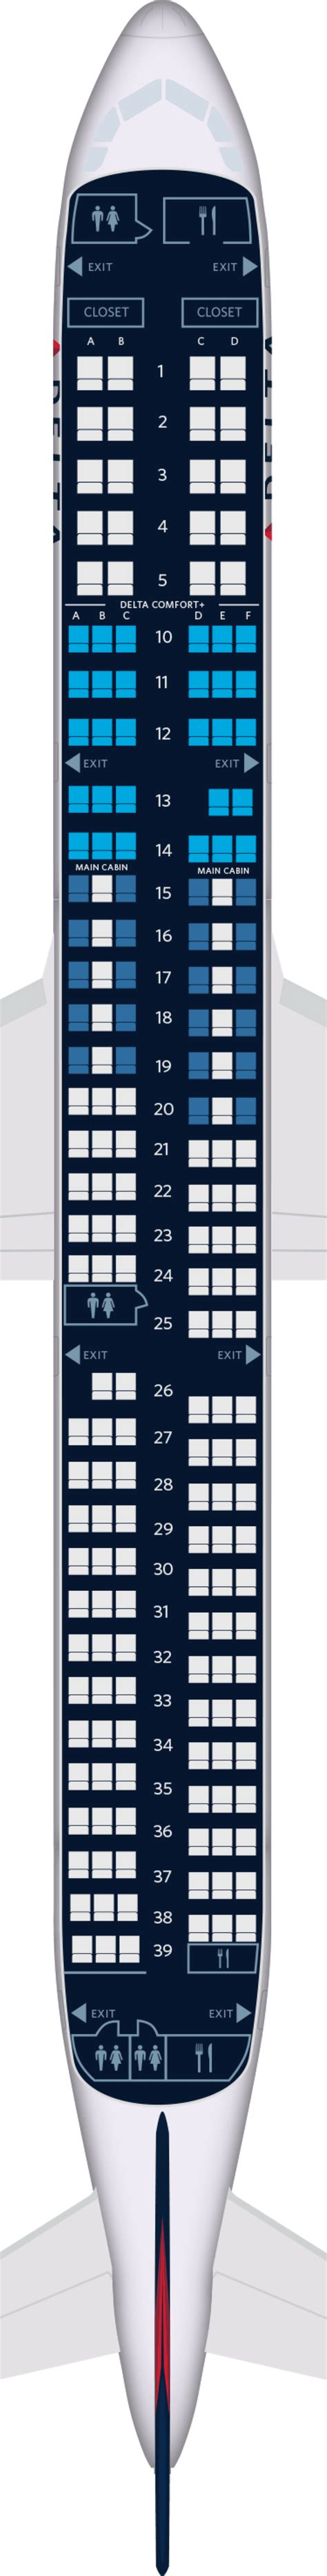 Hawaiian Airlines Seat Map Airbus A321 Elcho Table